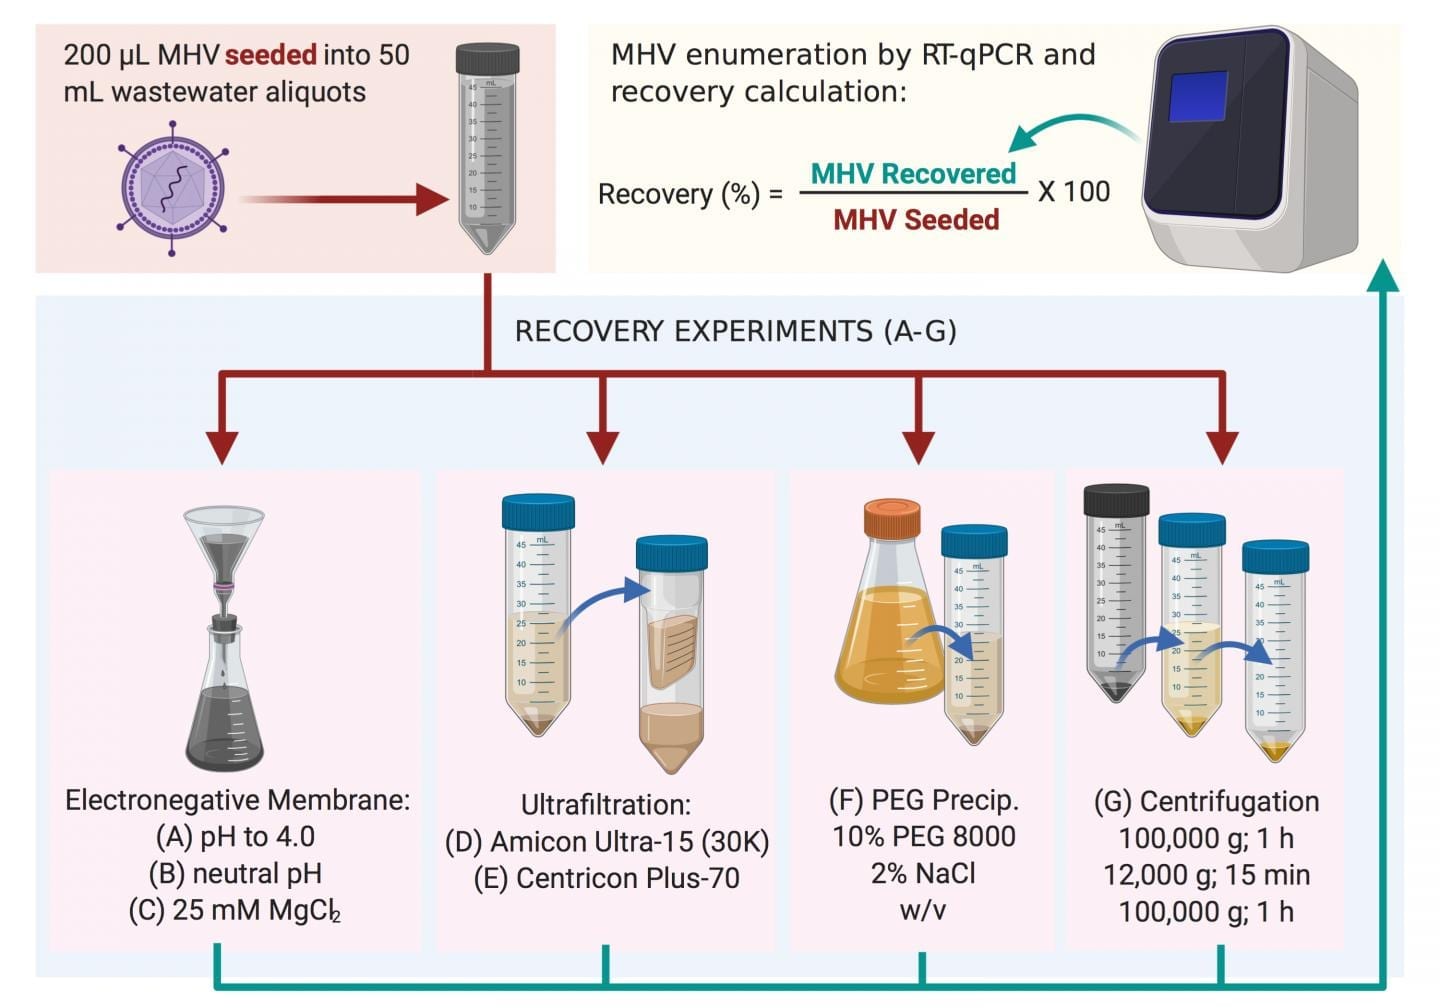 Methods used to recover MHV in this study. The most successful was method (C), followed by method (B) (Warish Ahmed et al., Science of The Total Environment, June 5, 2020).

CREDIT
Warish Ahmed et al., Science of The Total Environment, June 5, 2020